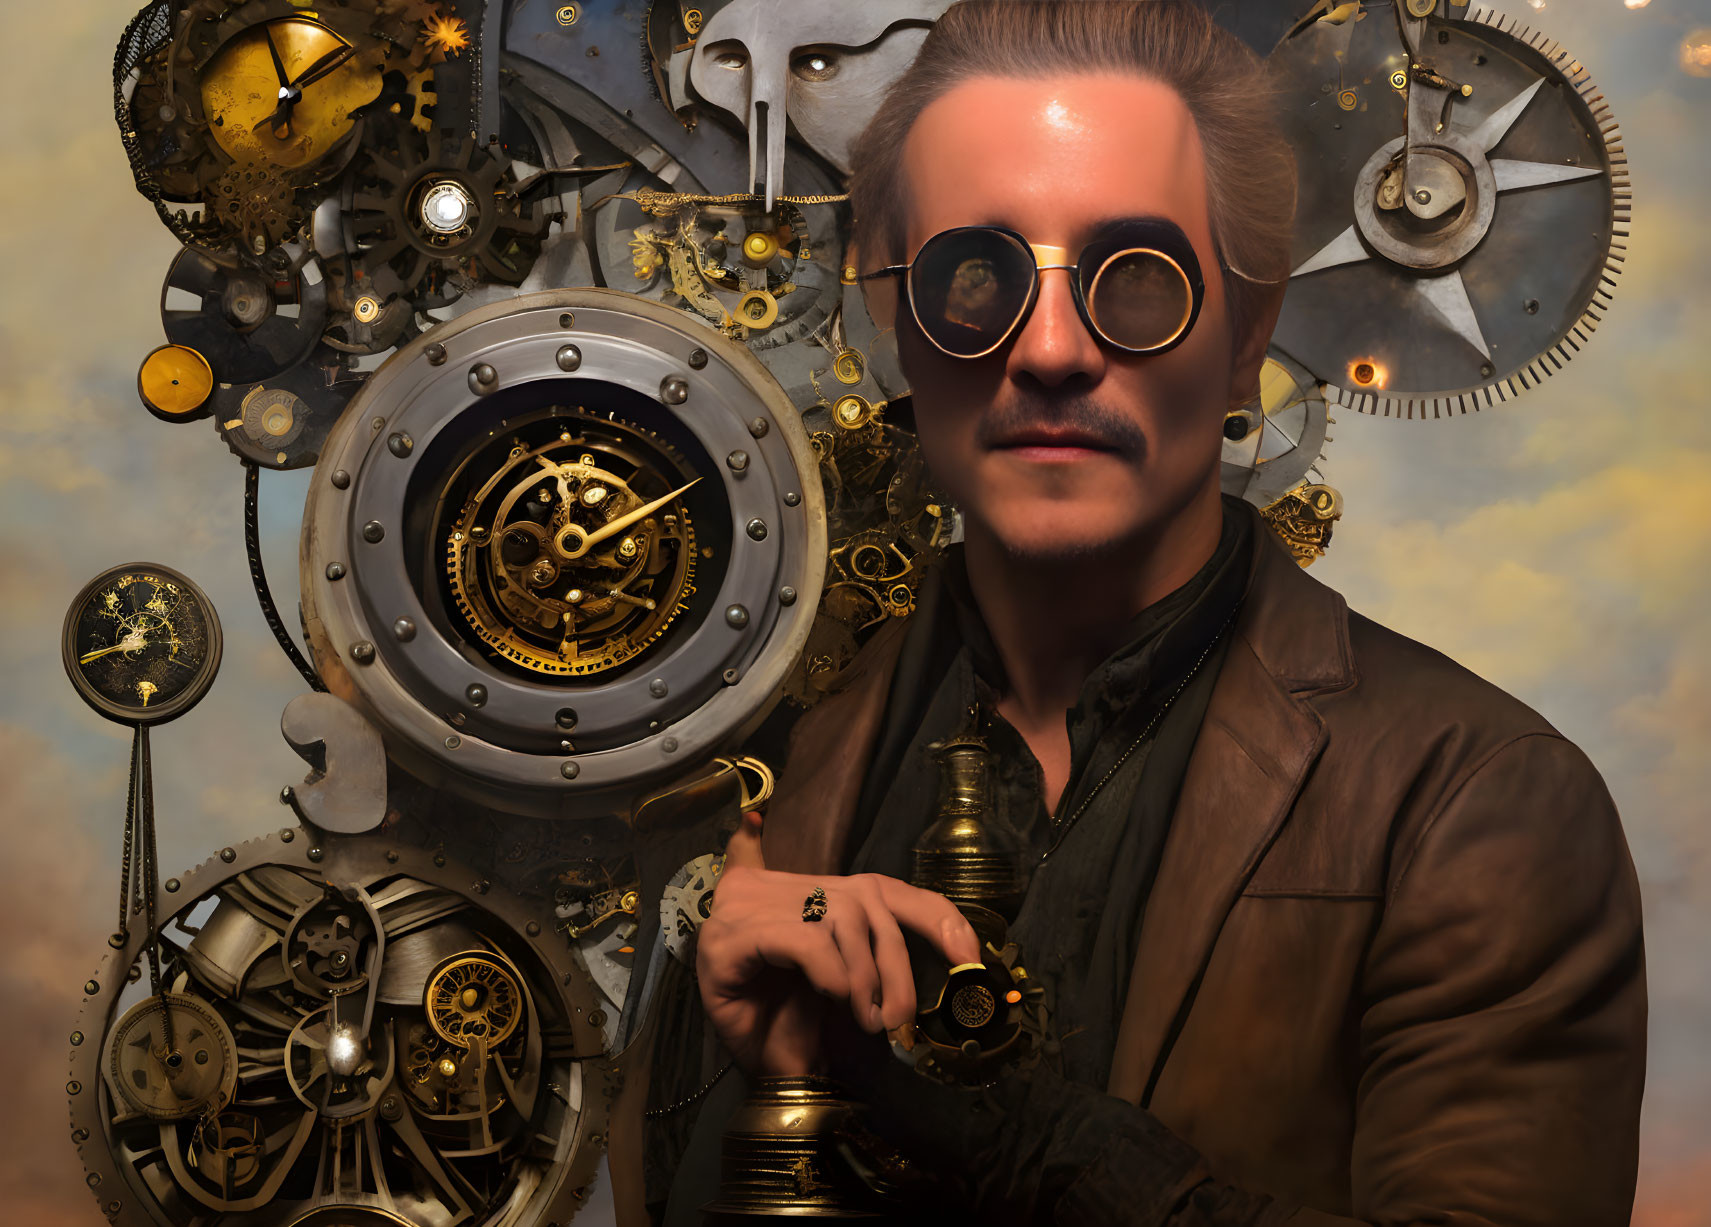 Man with mustache and round glasses in steampunk setting with pocket watch.